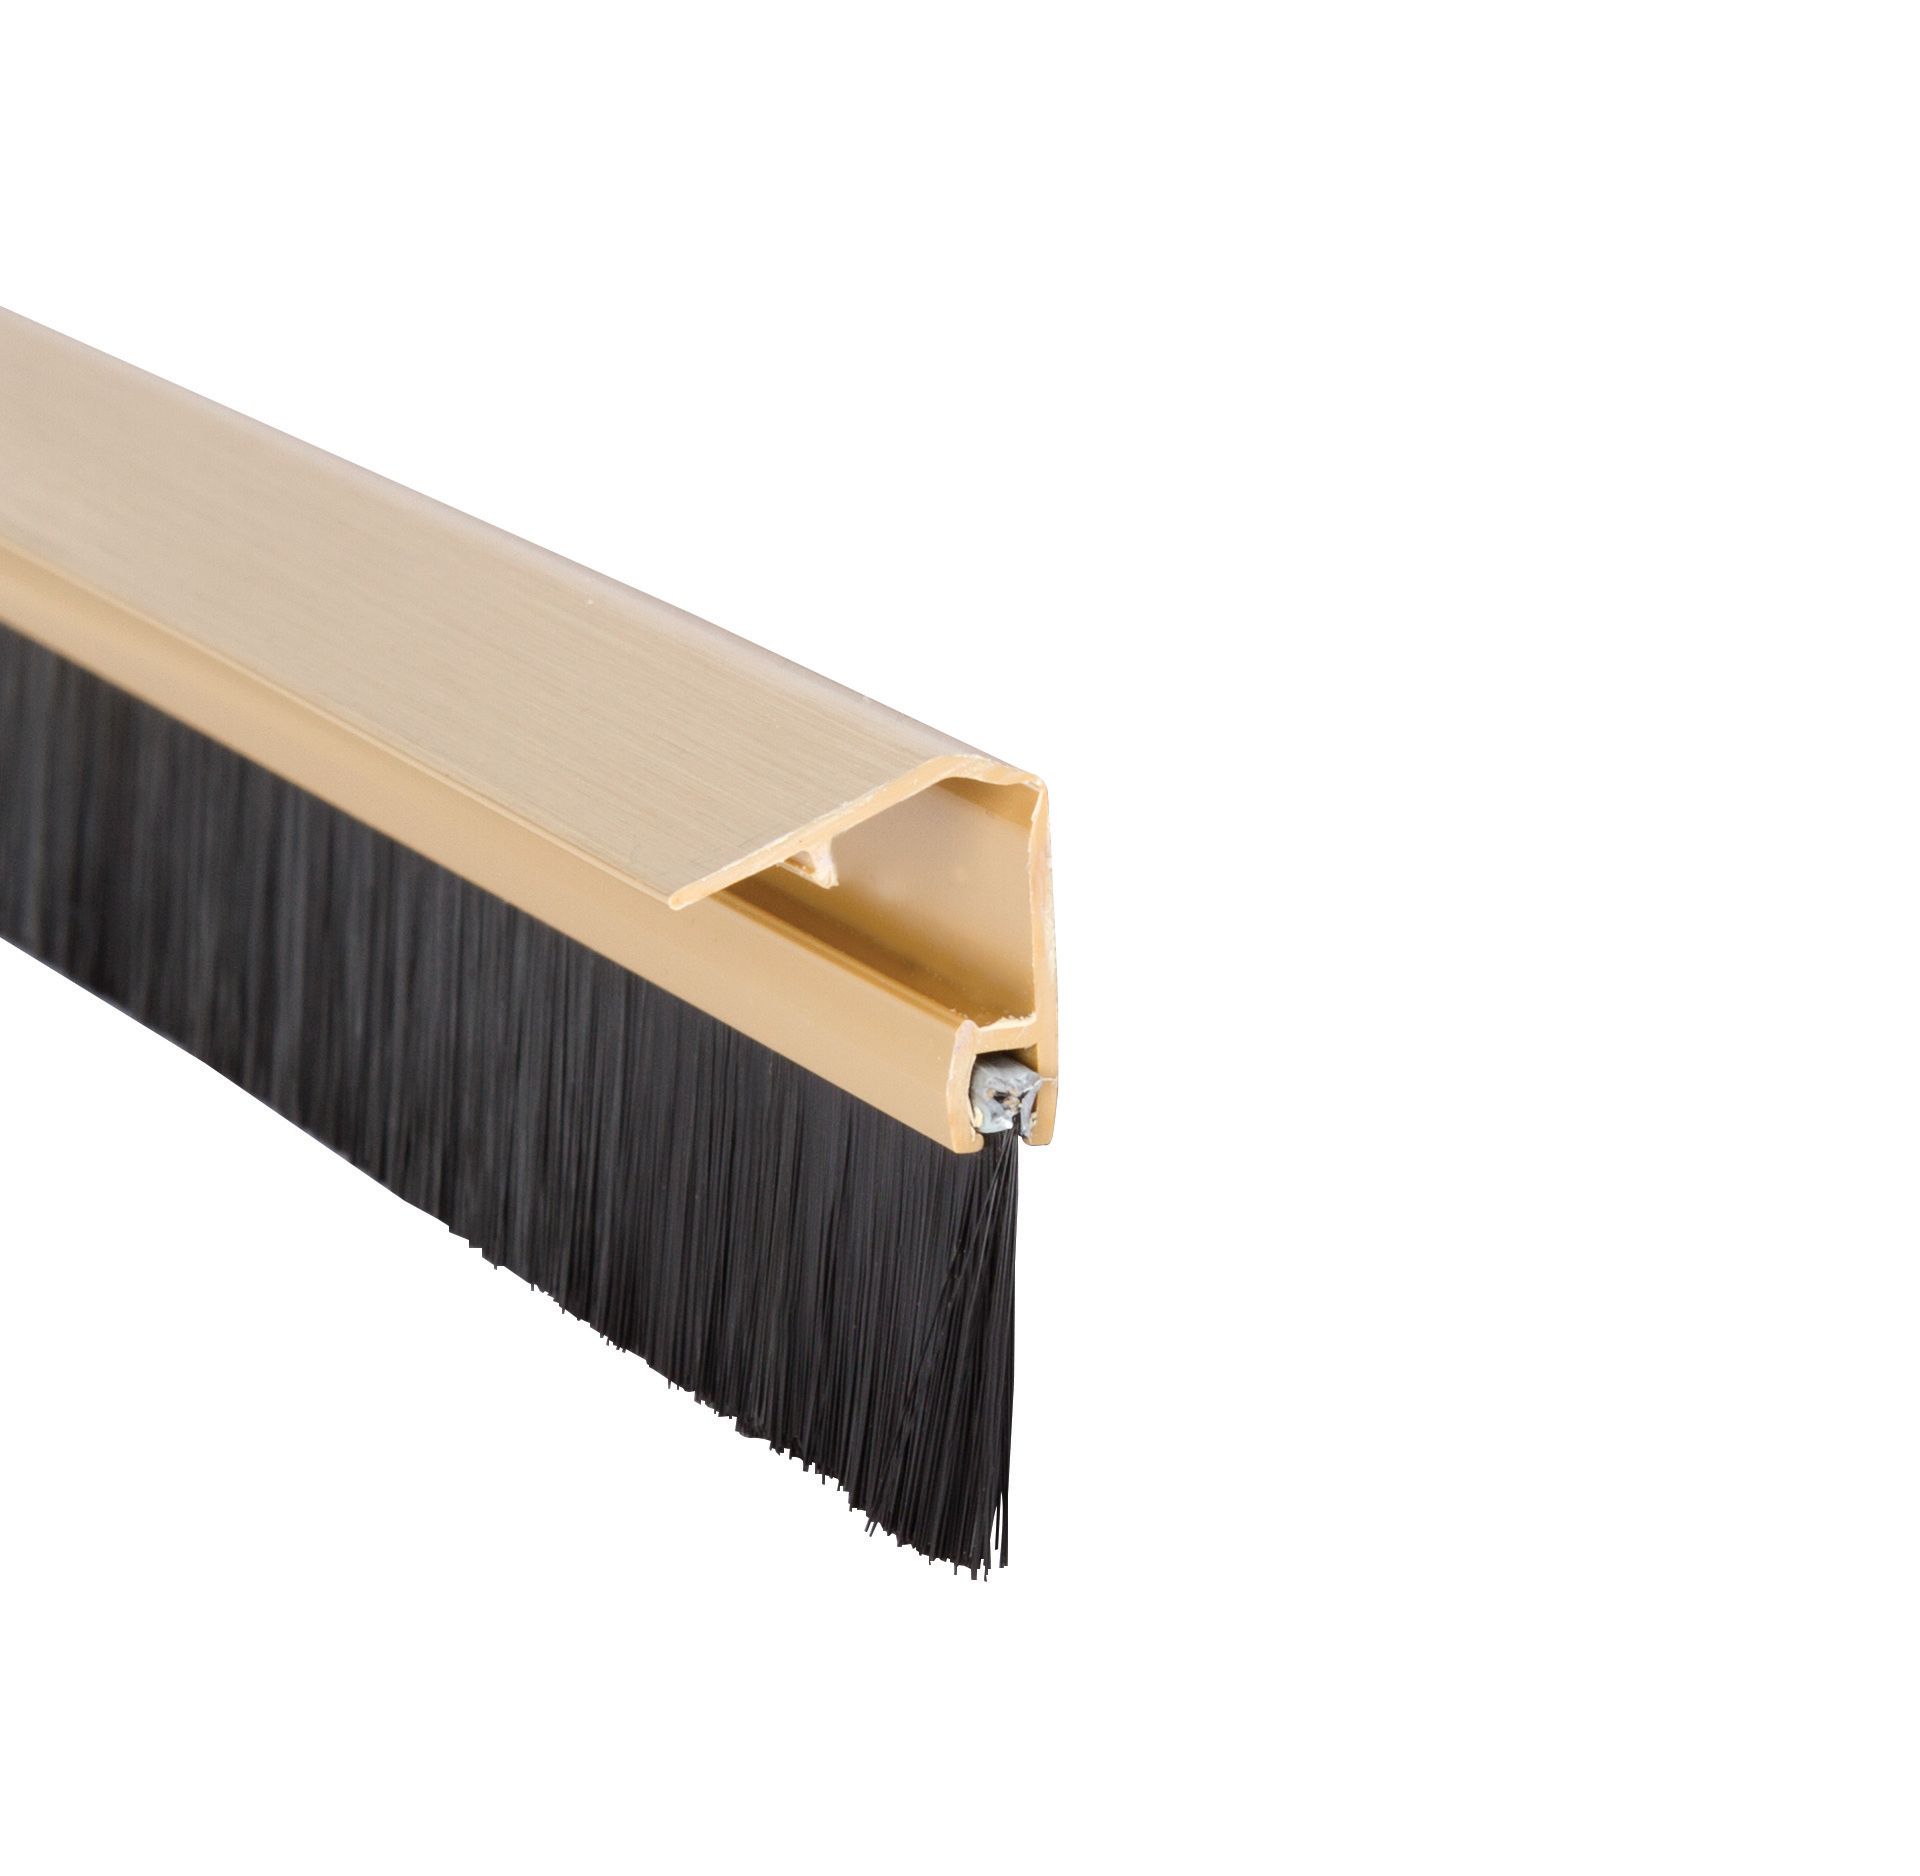 Image of Wickes 838mm Concealed Fixing Door Brush Draught Excluder - Gold Effect